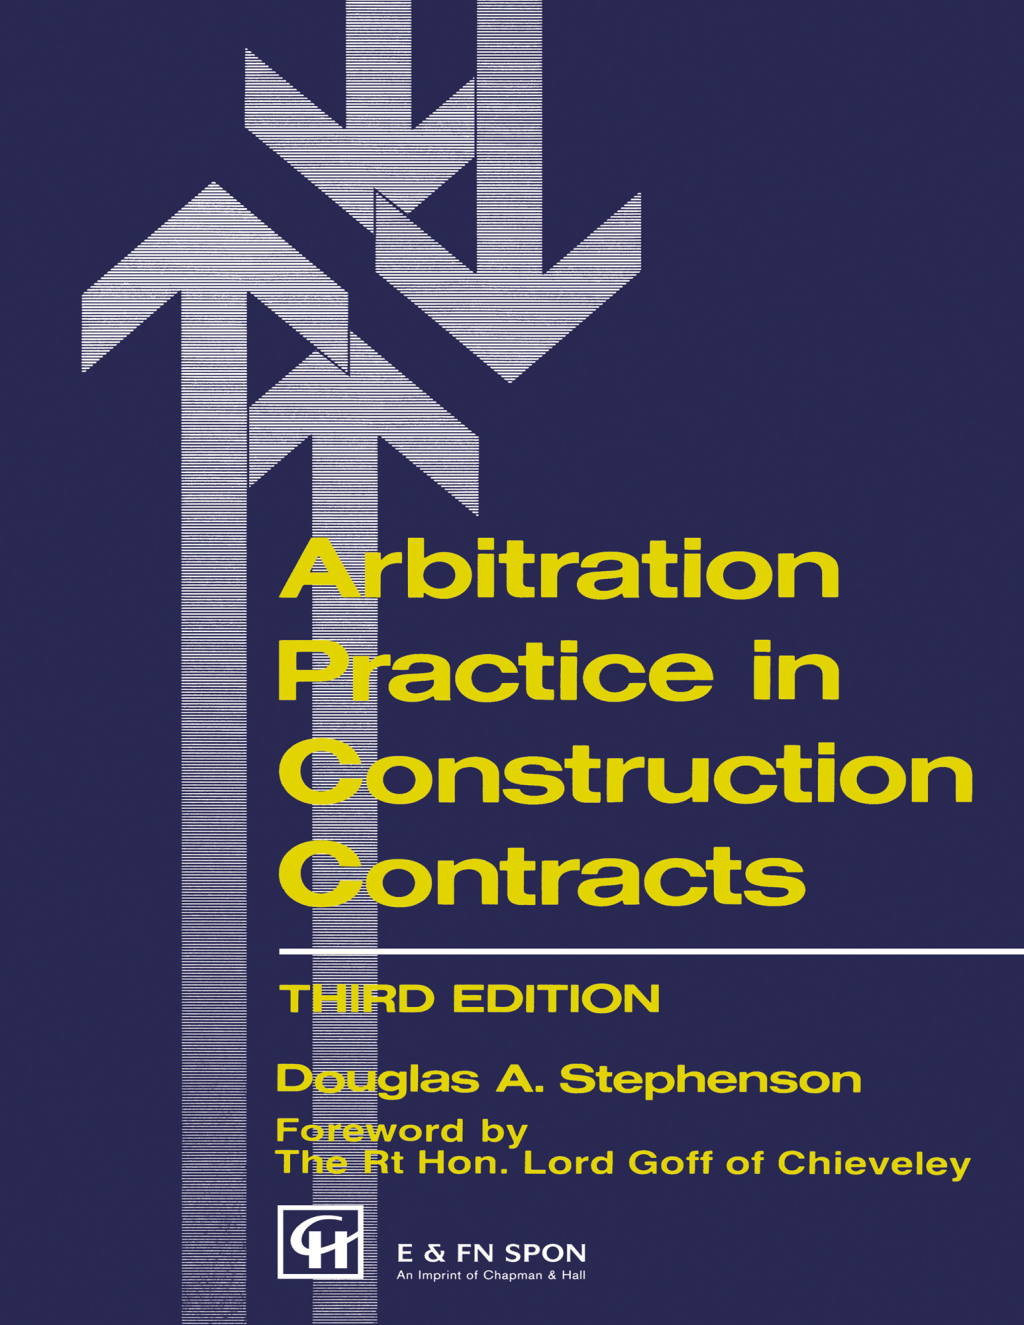 Arbitration Practice in Construction Contracts - 3rd Edition (eBook Rental)